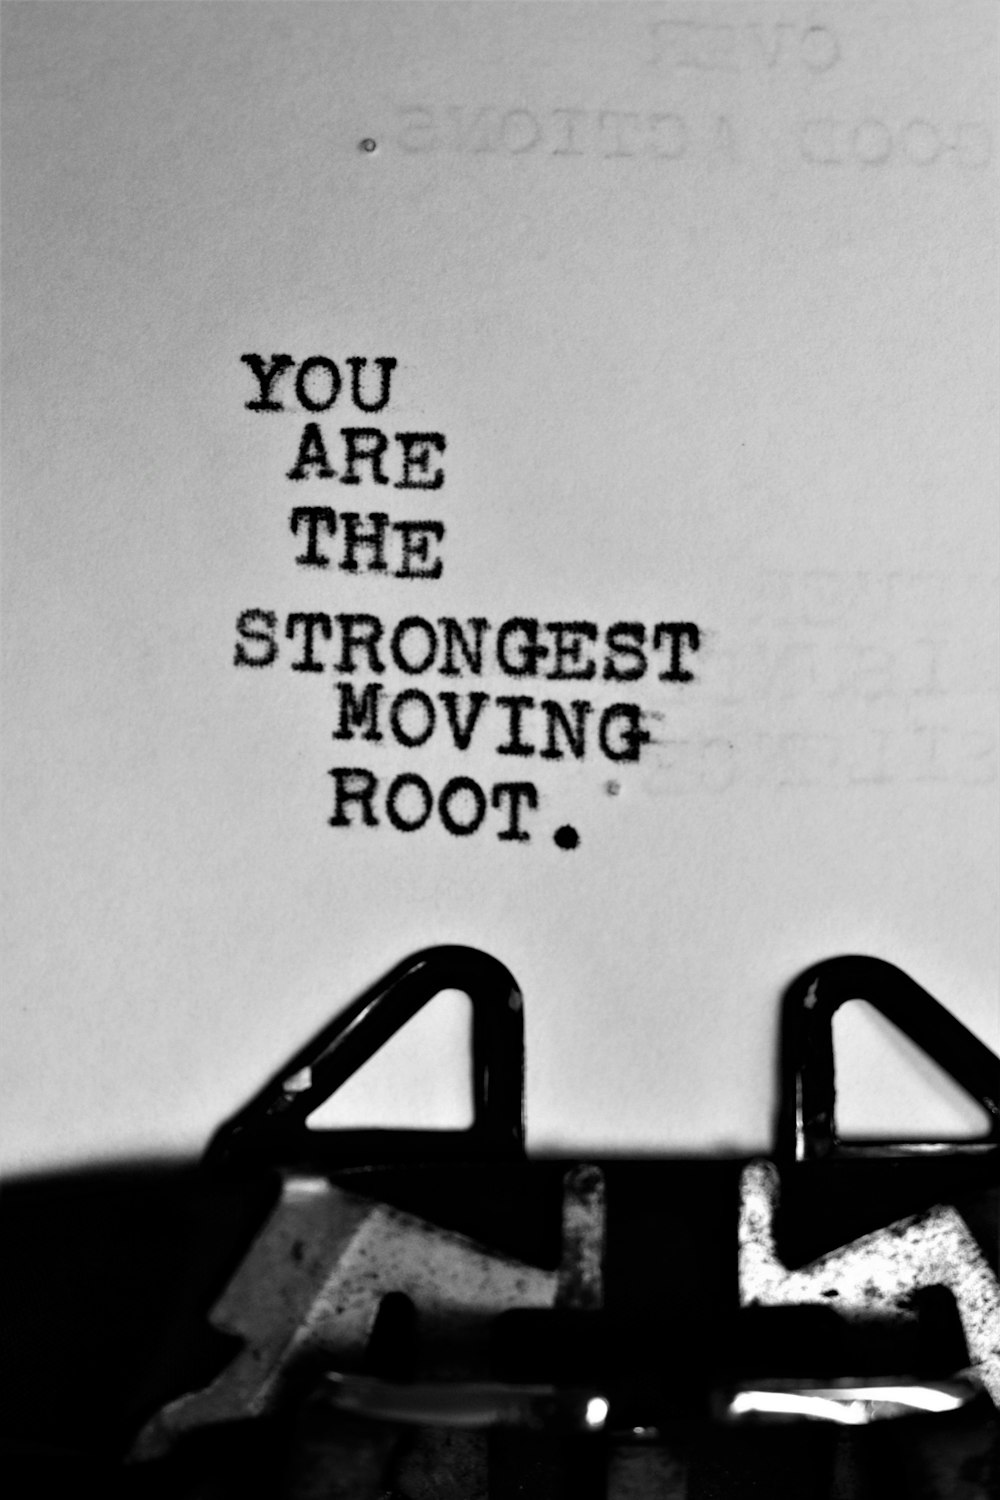 a typewriter with the words you are the strongest moving root